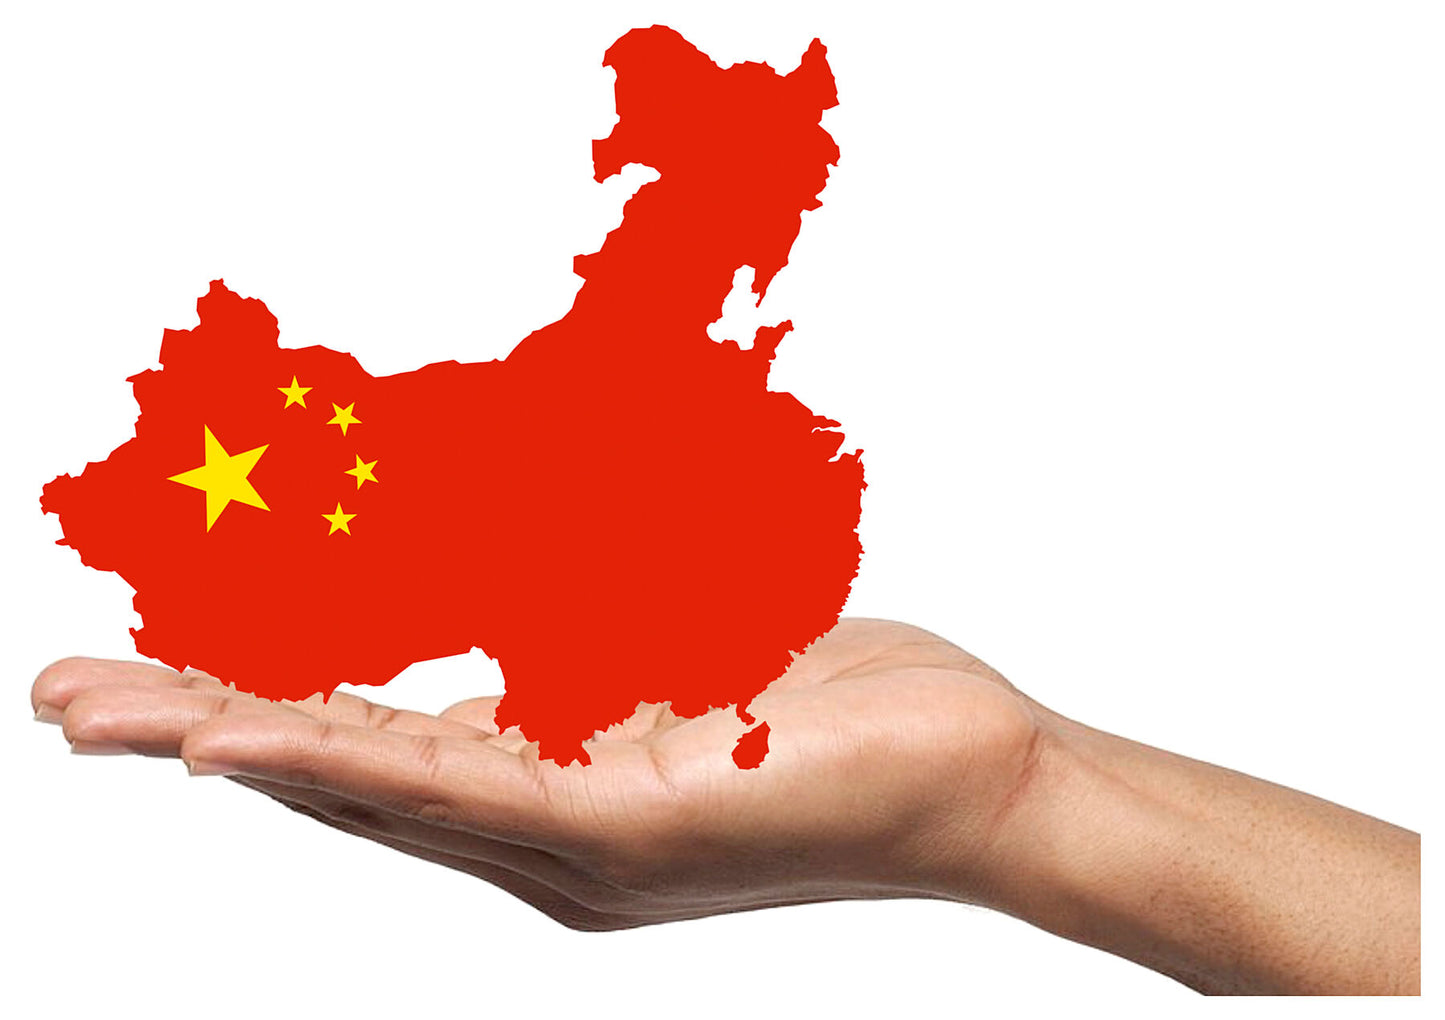 A red mixture of the China flag and a map of China held in the palm of a hand